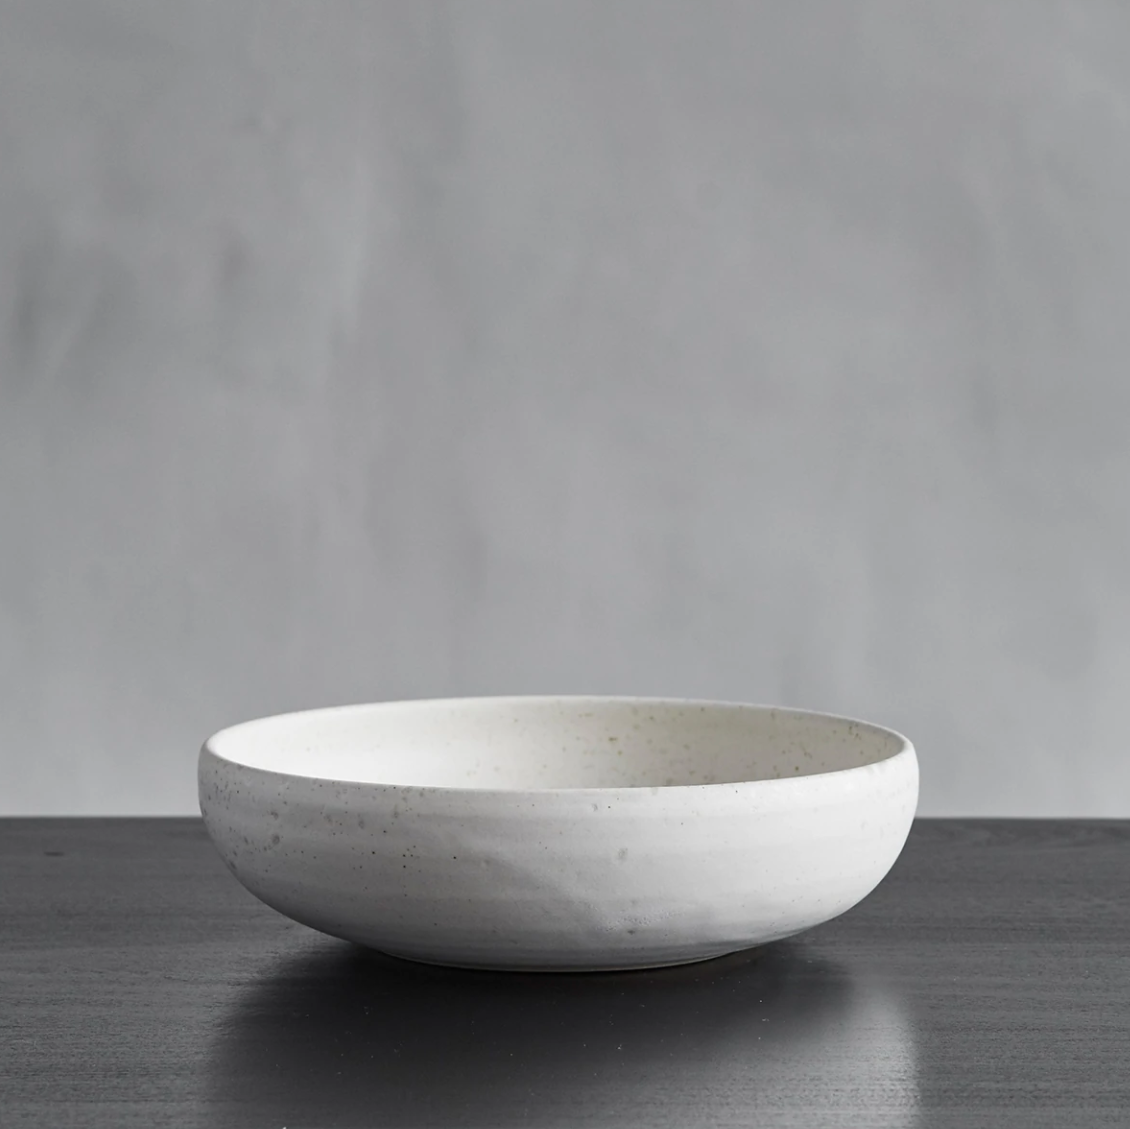 Eating on the Couch Just Got More Stylish Thanks to This Kind of Bowl